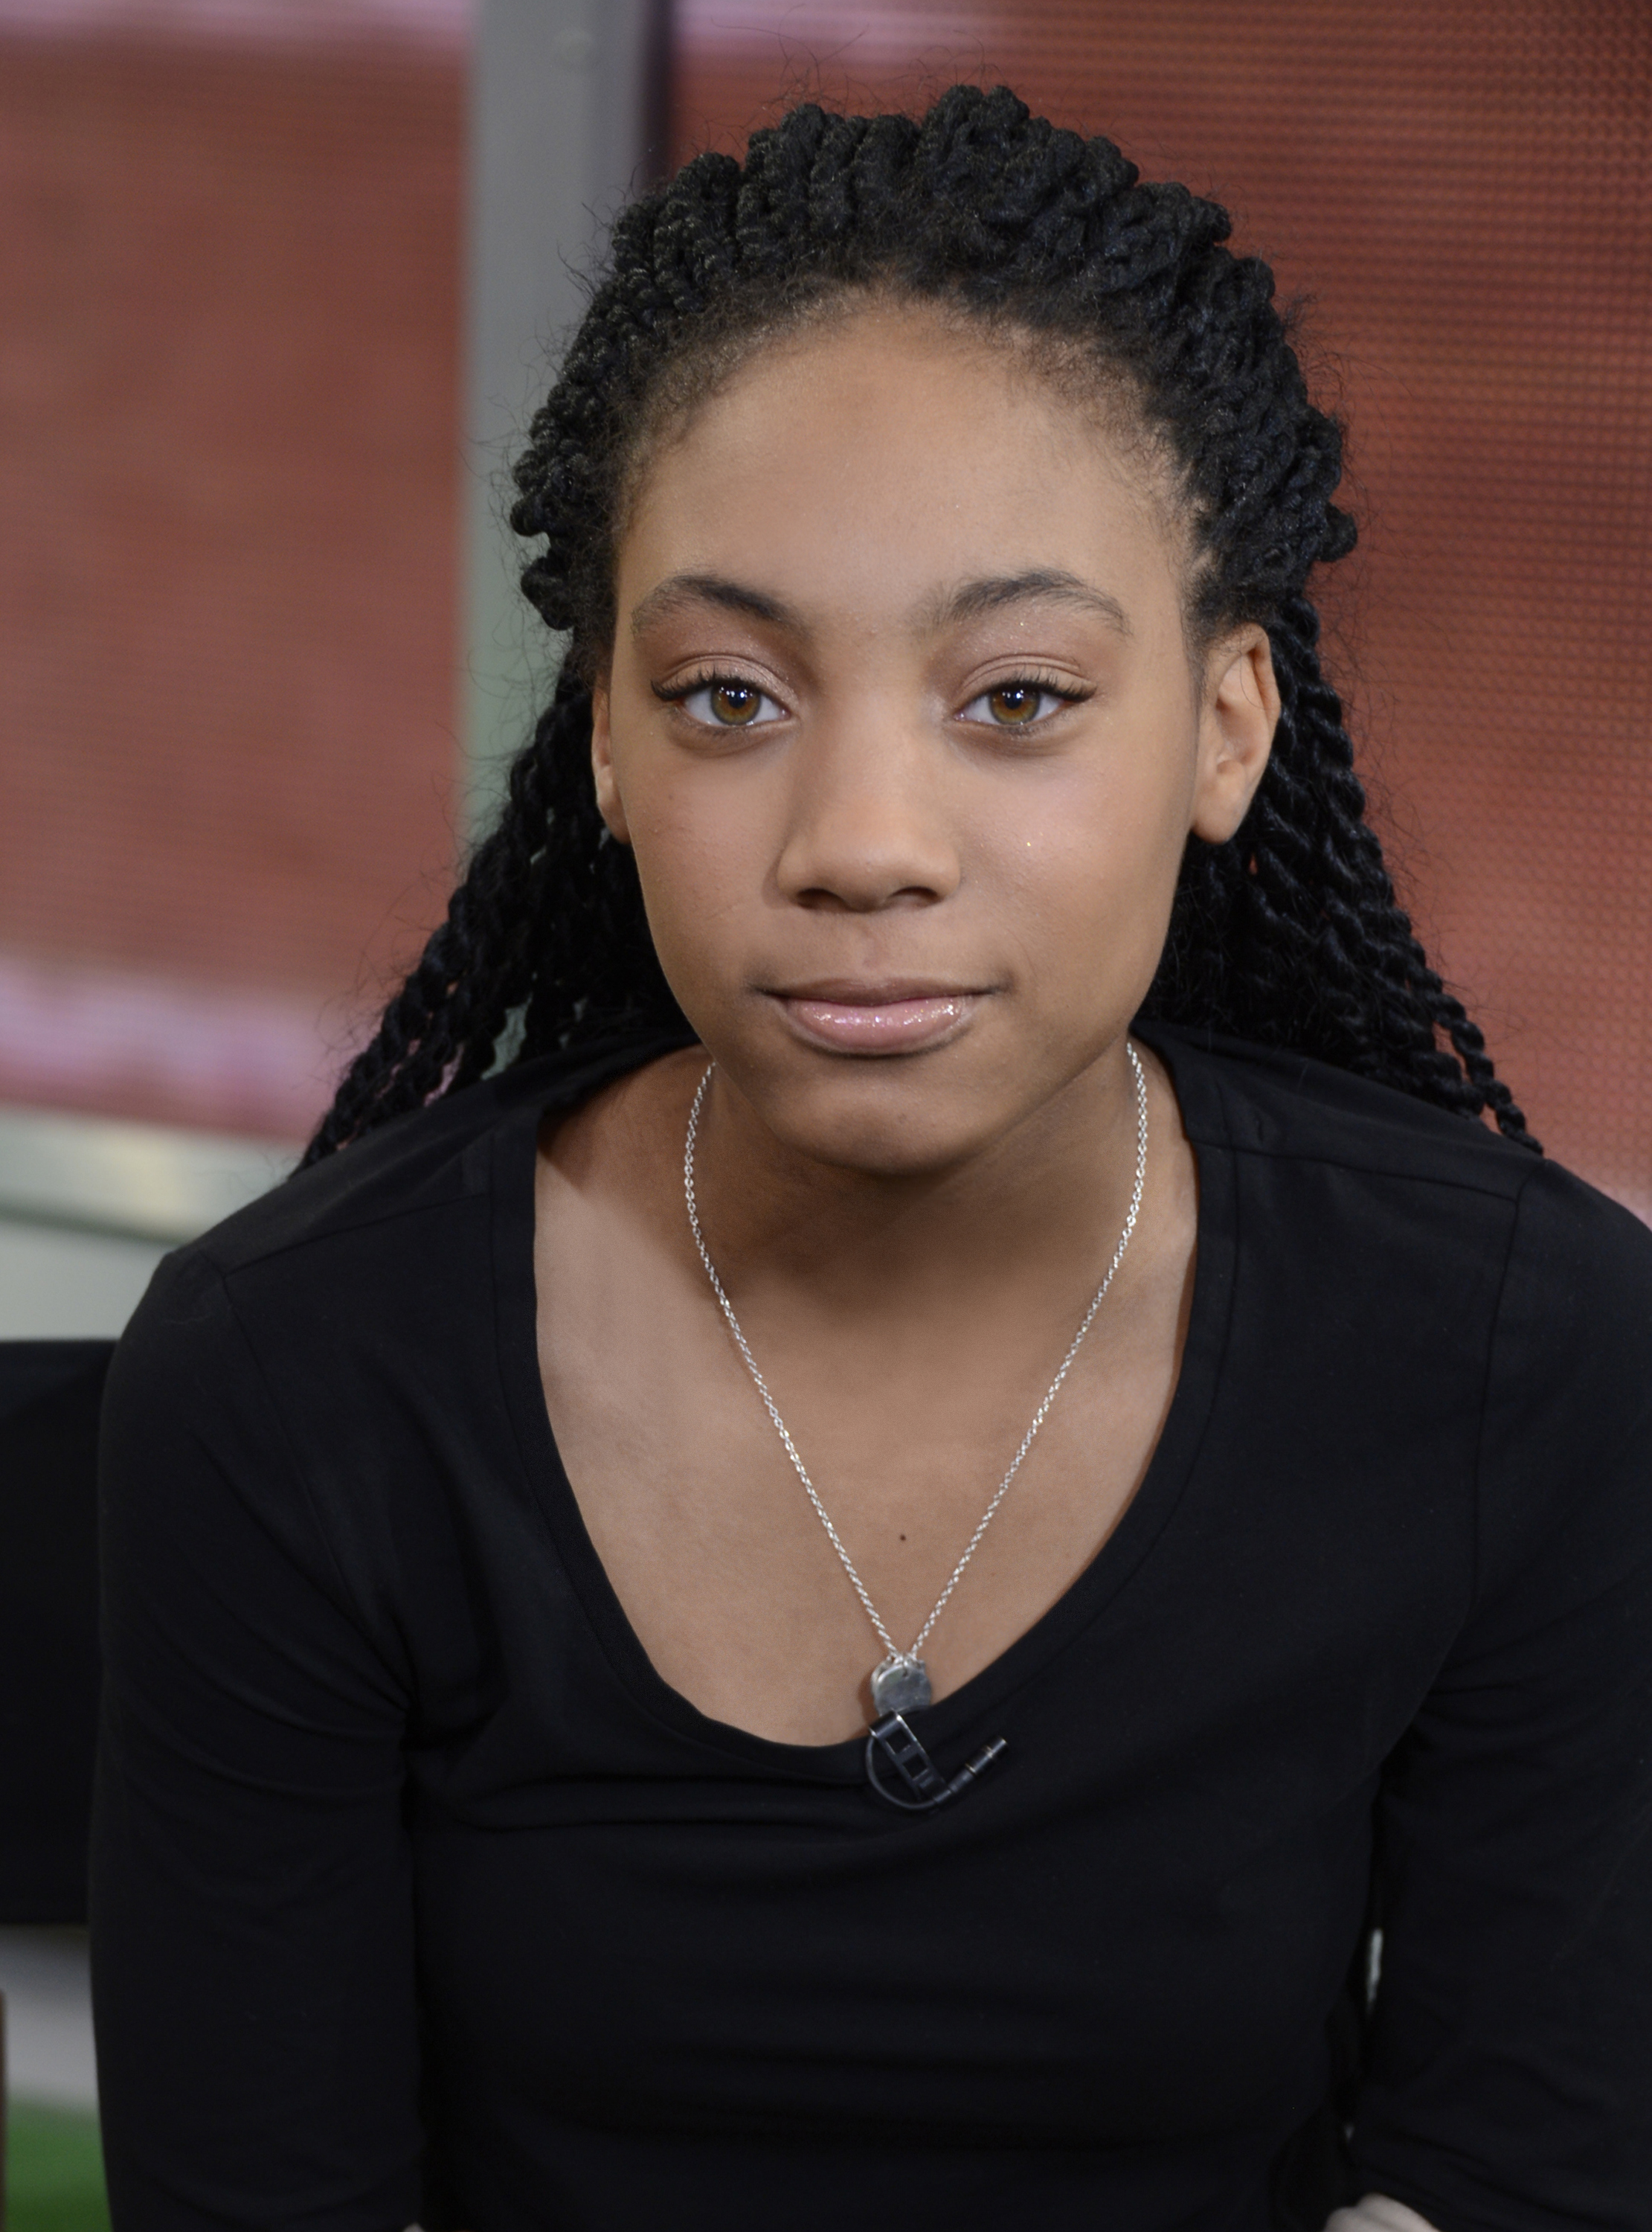 Mo'ne Davis, the first female pitcher to win a game in the Little League World Series and is in the National Baseball Hall of Fame on Good Morning America on March 10, 2015.